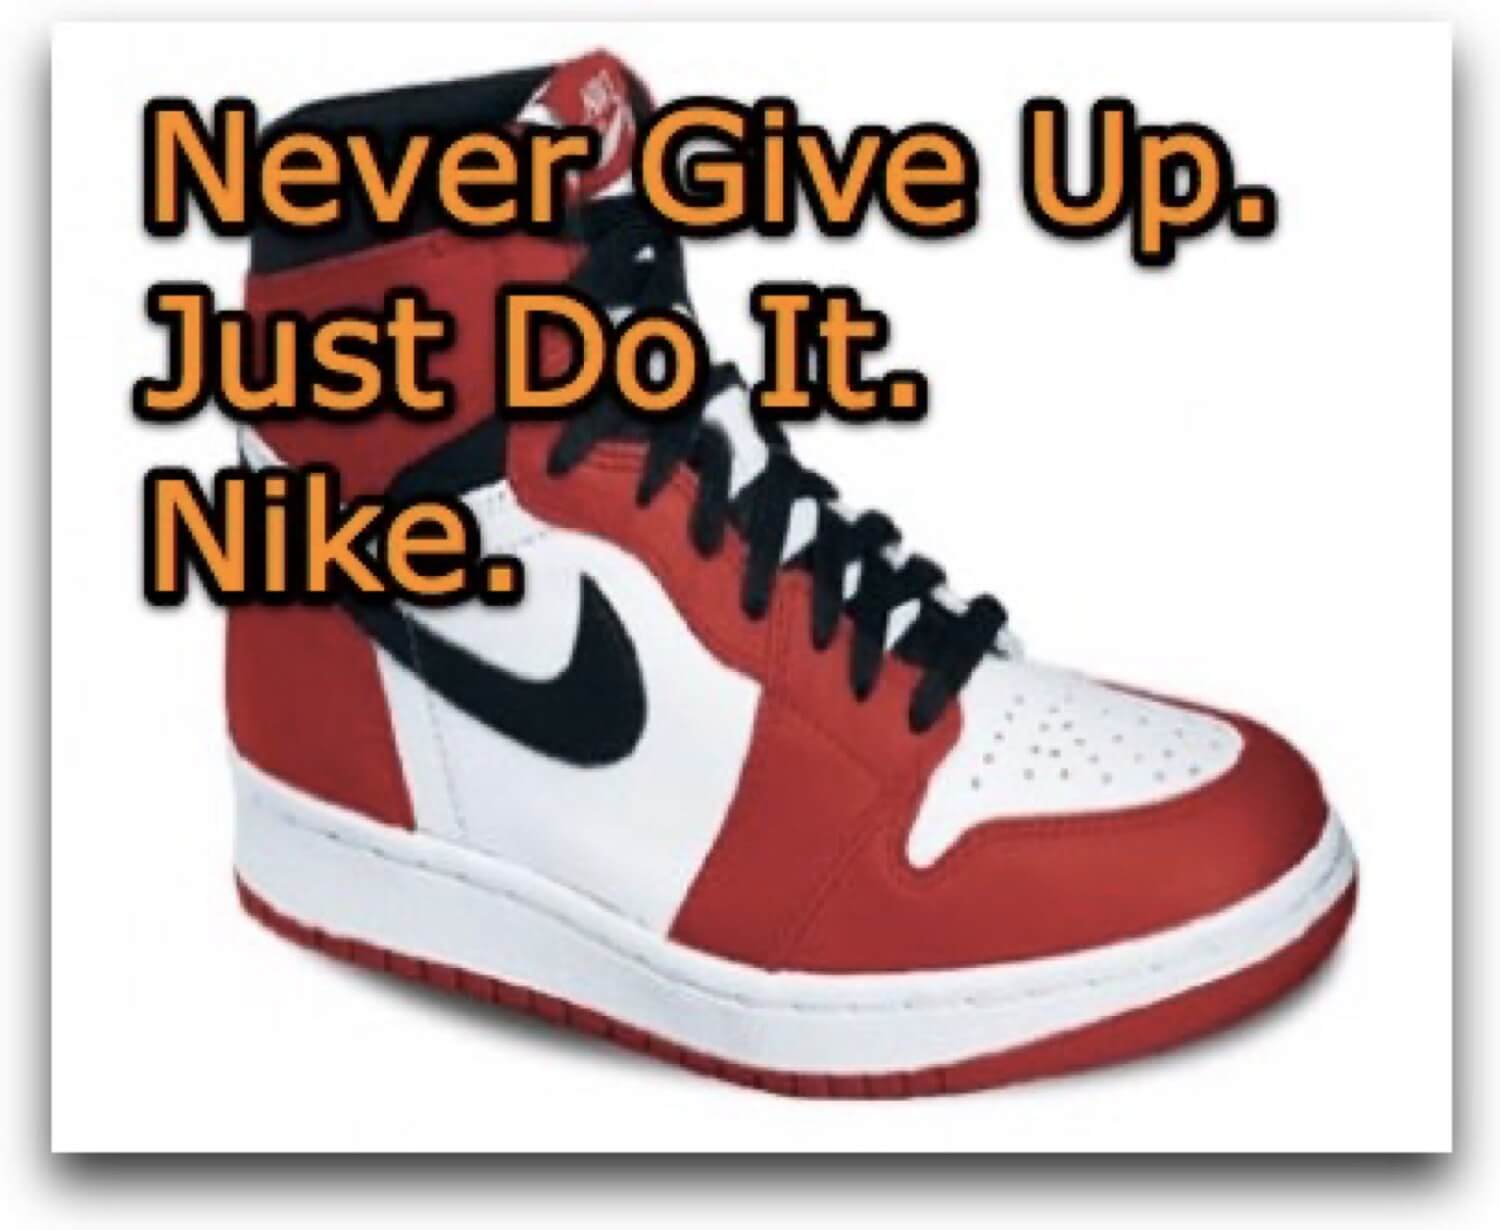 Never give up. Just do it. Nike.